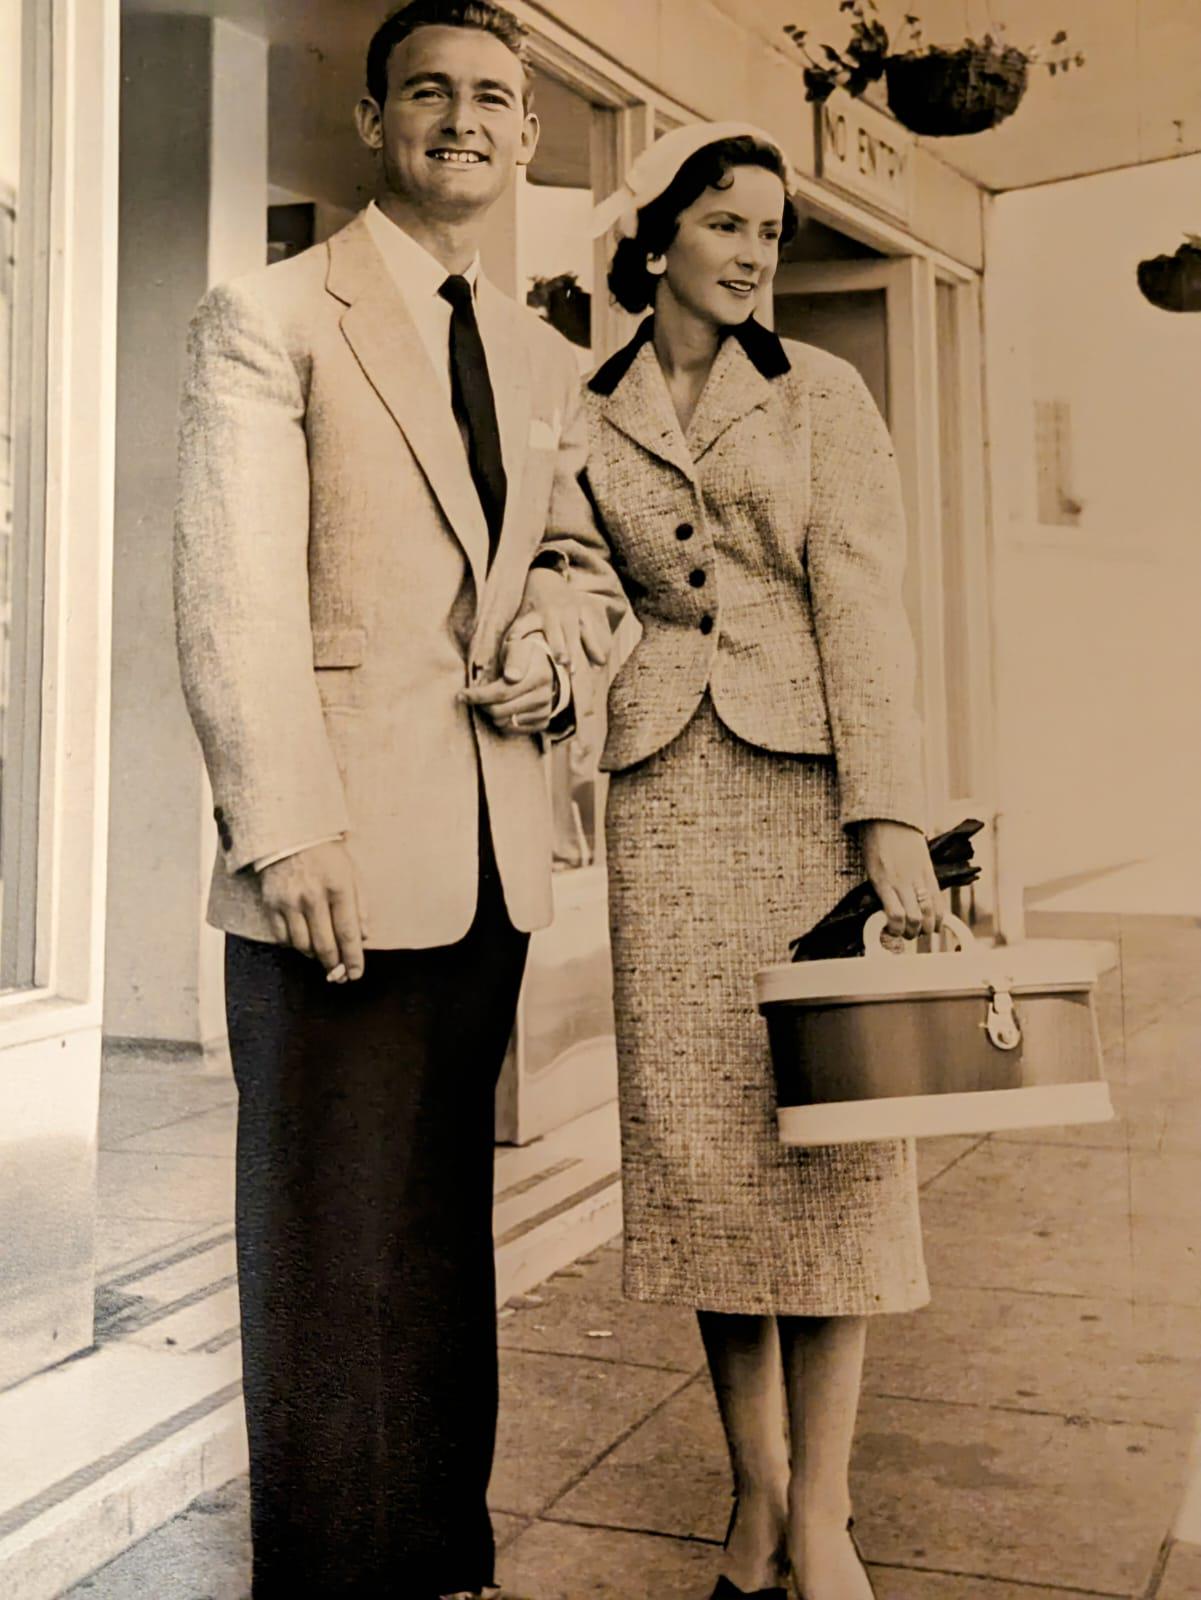 My grandparents going on their honeymoon in the 50s looking like movie stars.jpeg